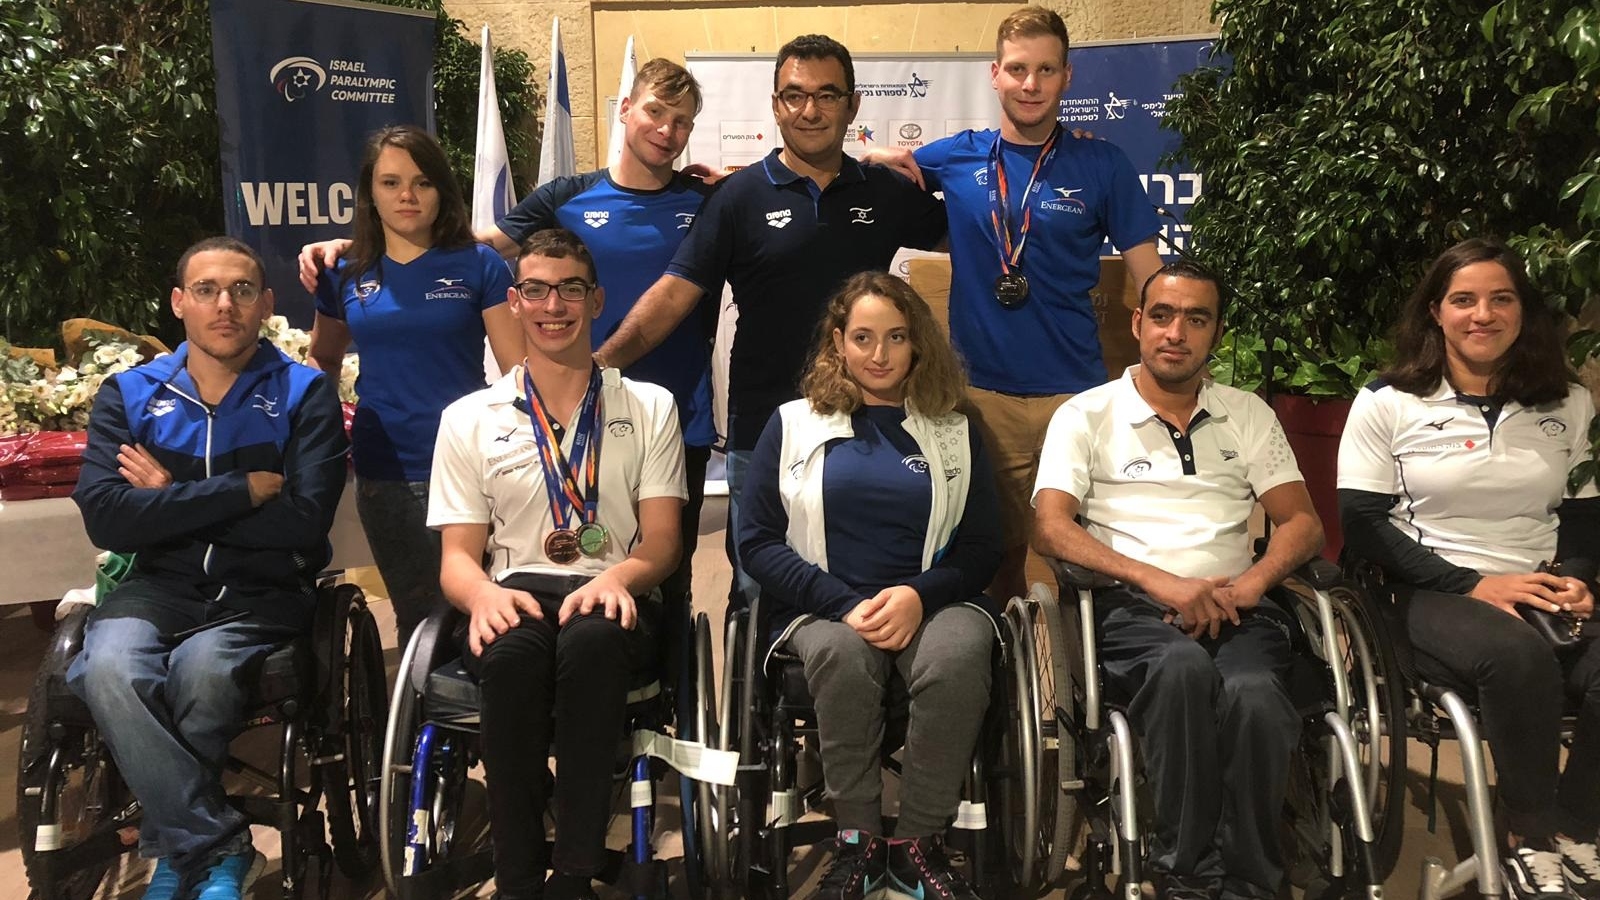 Israeli Paralympic swimmer sets world record, wins gold - ISRAEL21c